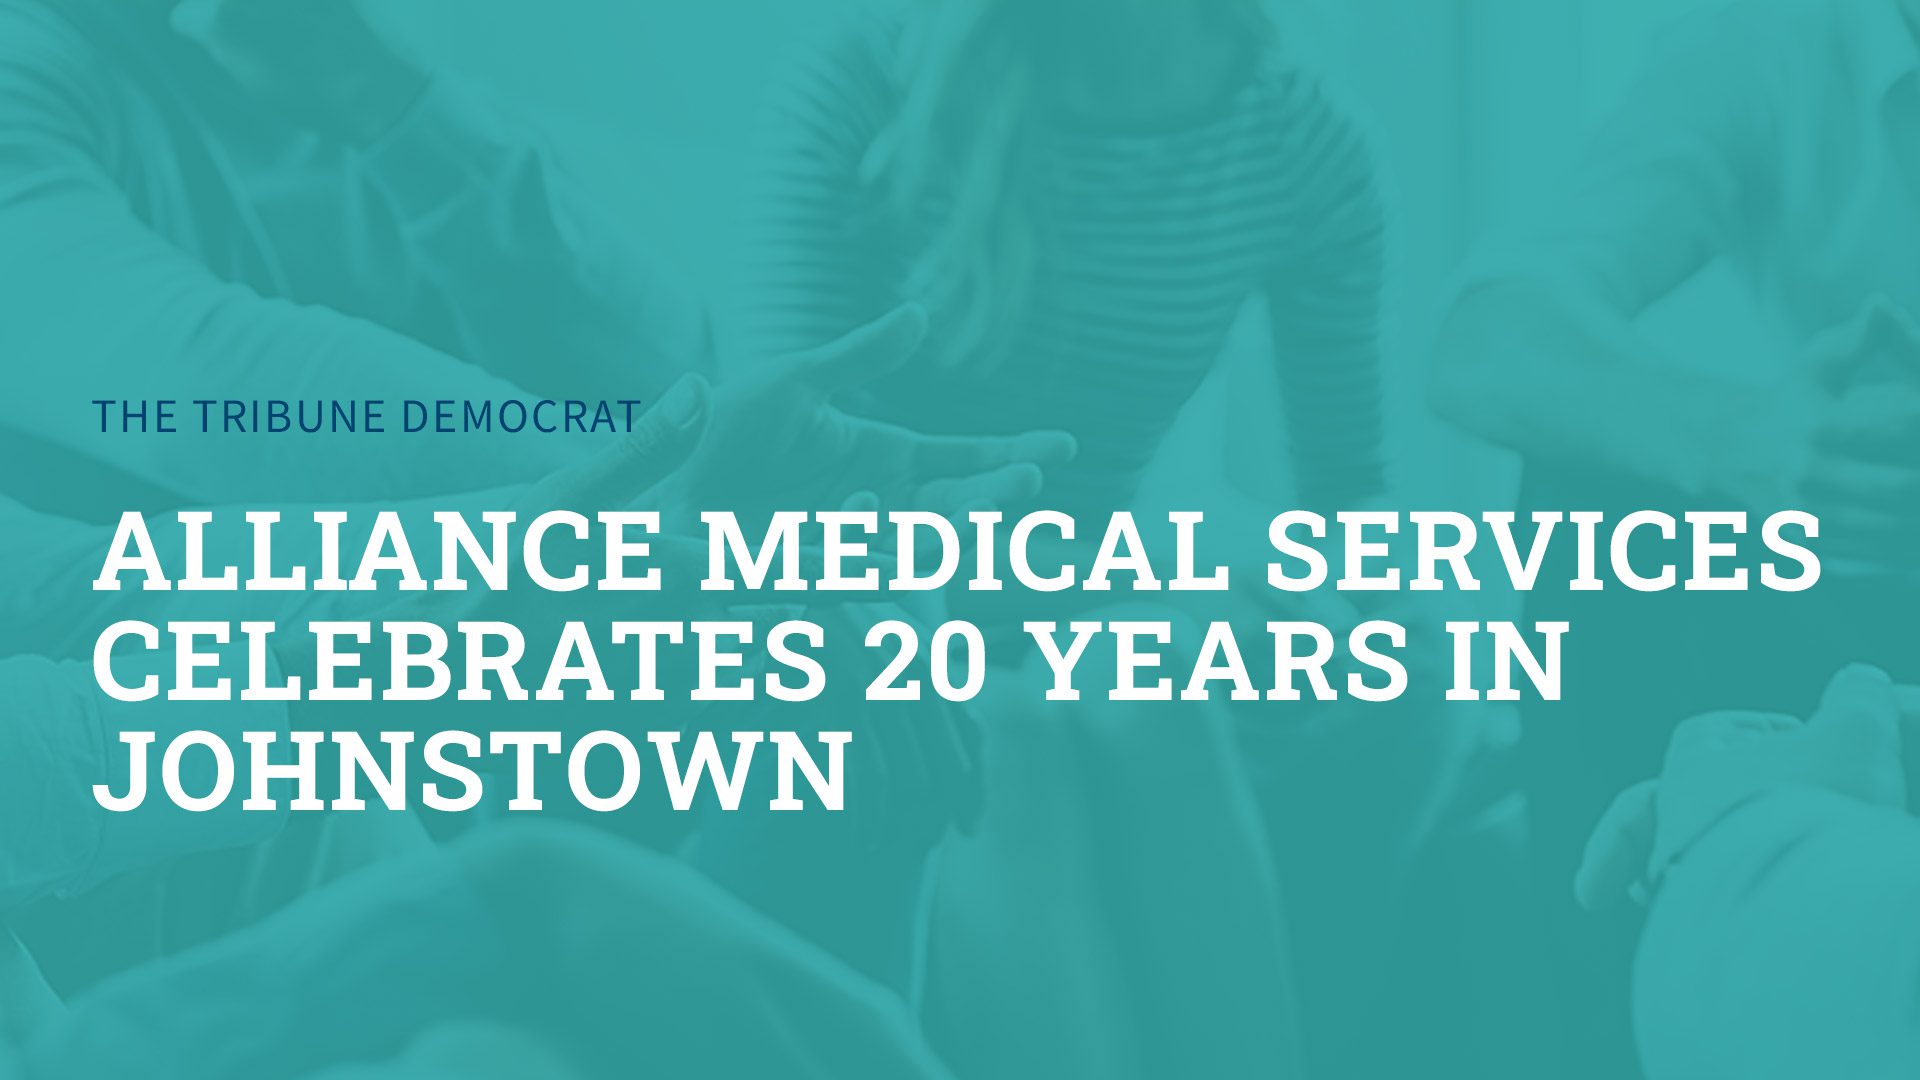 Alliance Medical Services celebrates 20 years in Johnstown